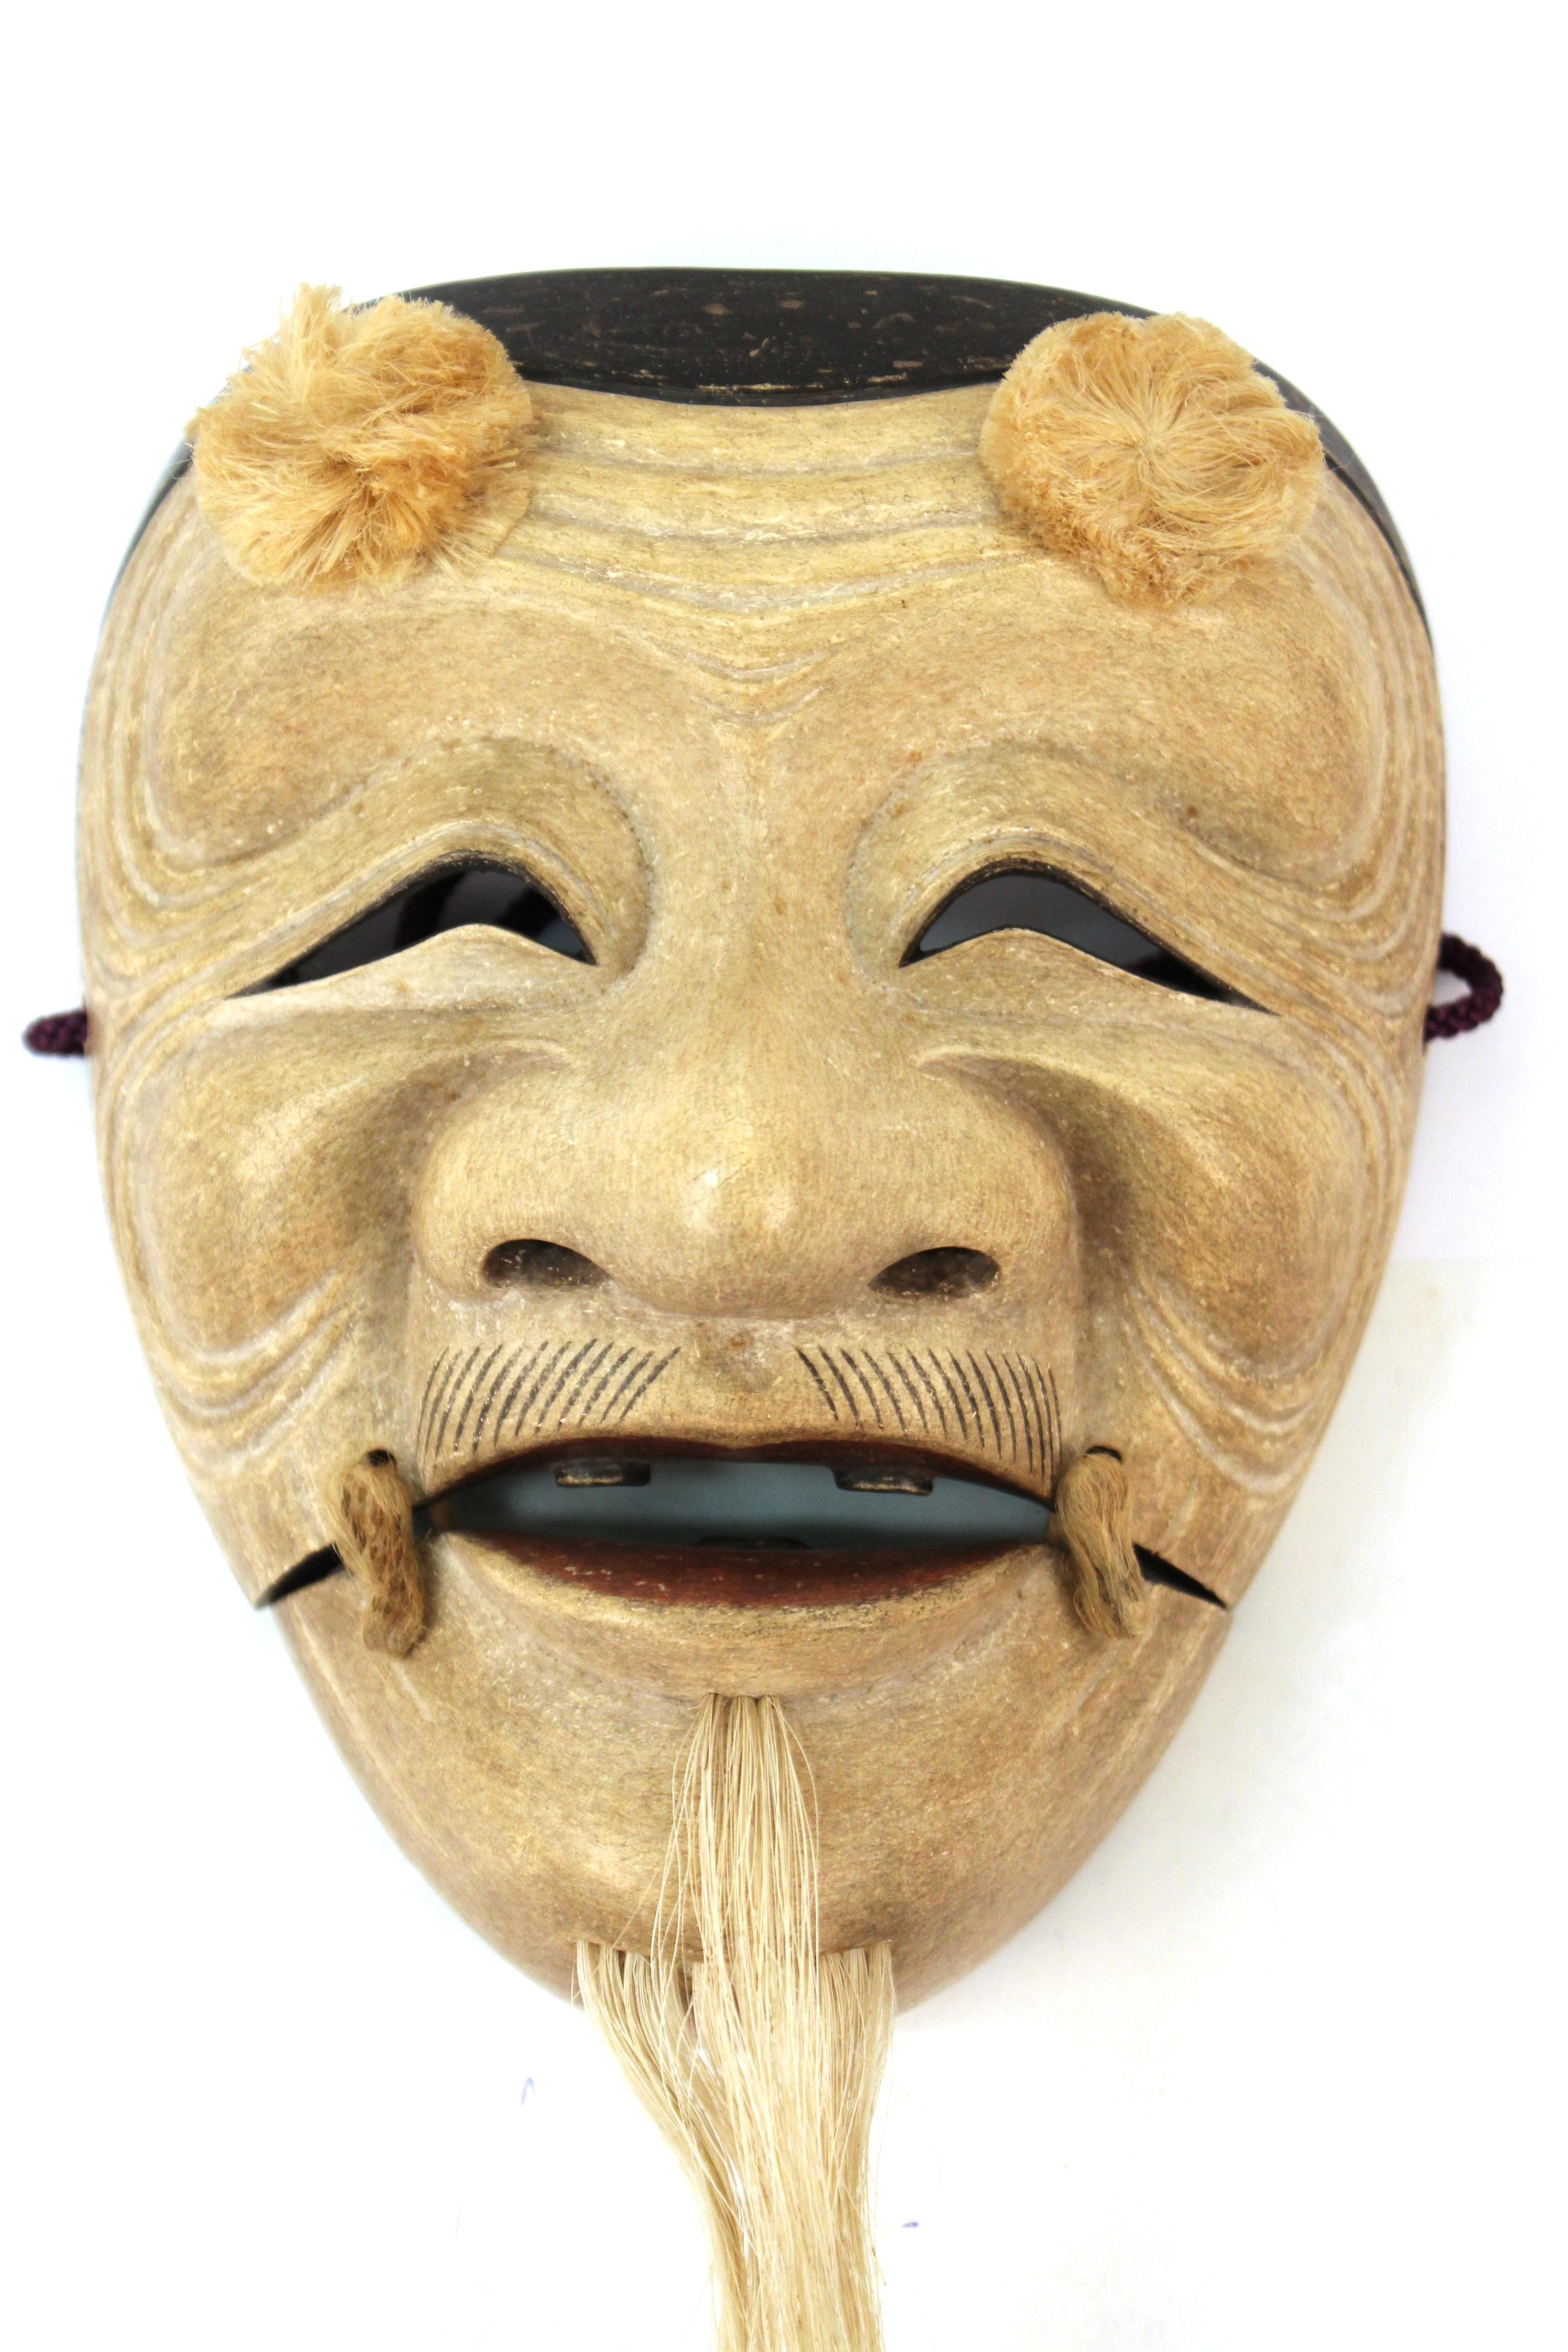 Japanese carved wood Noh mask depicting Okina. The piece was made during the late Edo - early Meiji period in the 19th century. The mask is of an older man with long white beard, which is a sign of wisdom. The Okina mask takes its origin from the